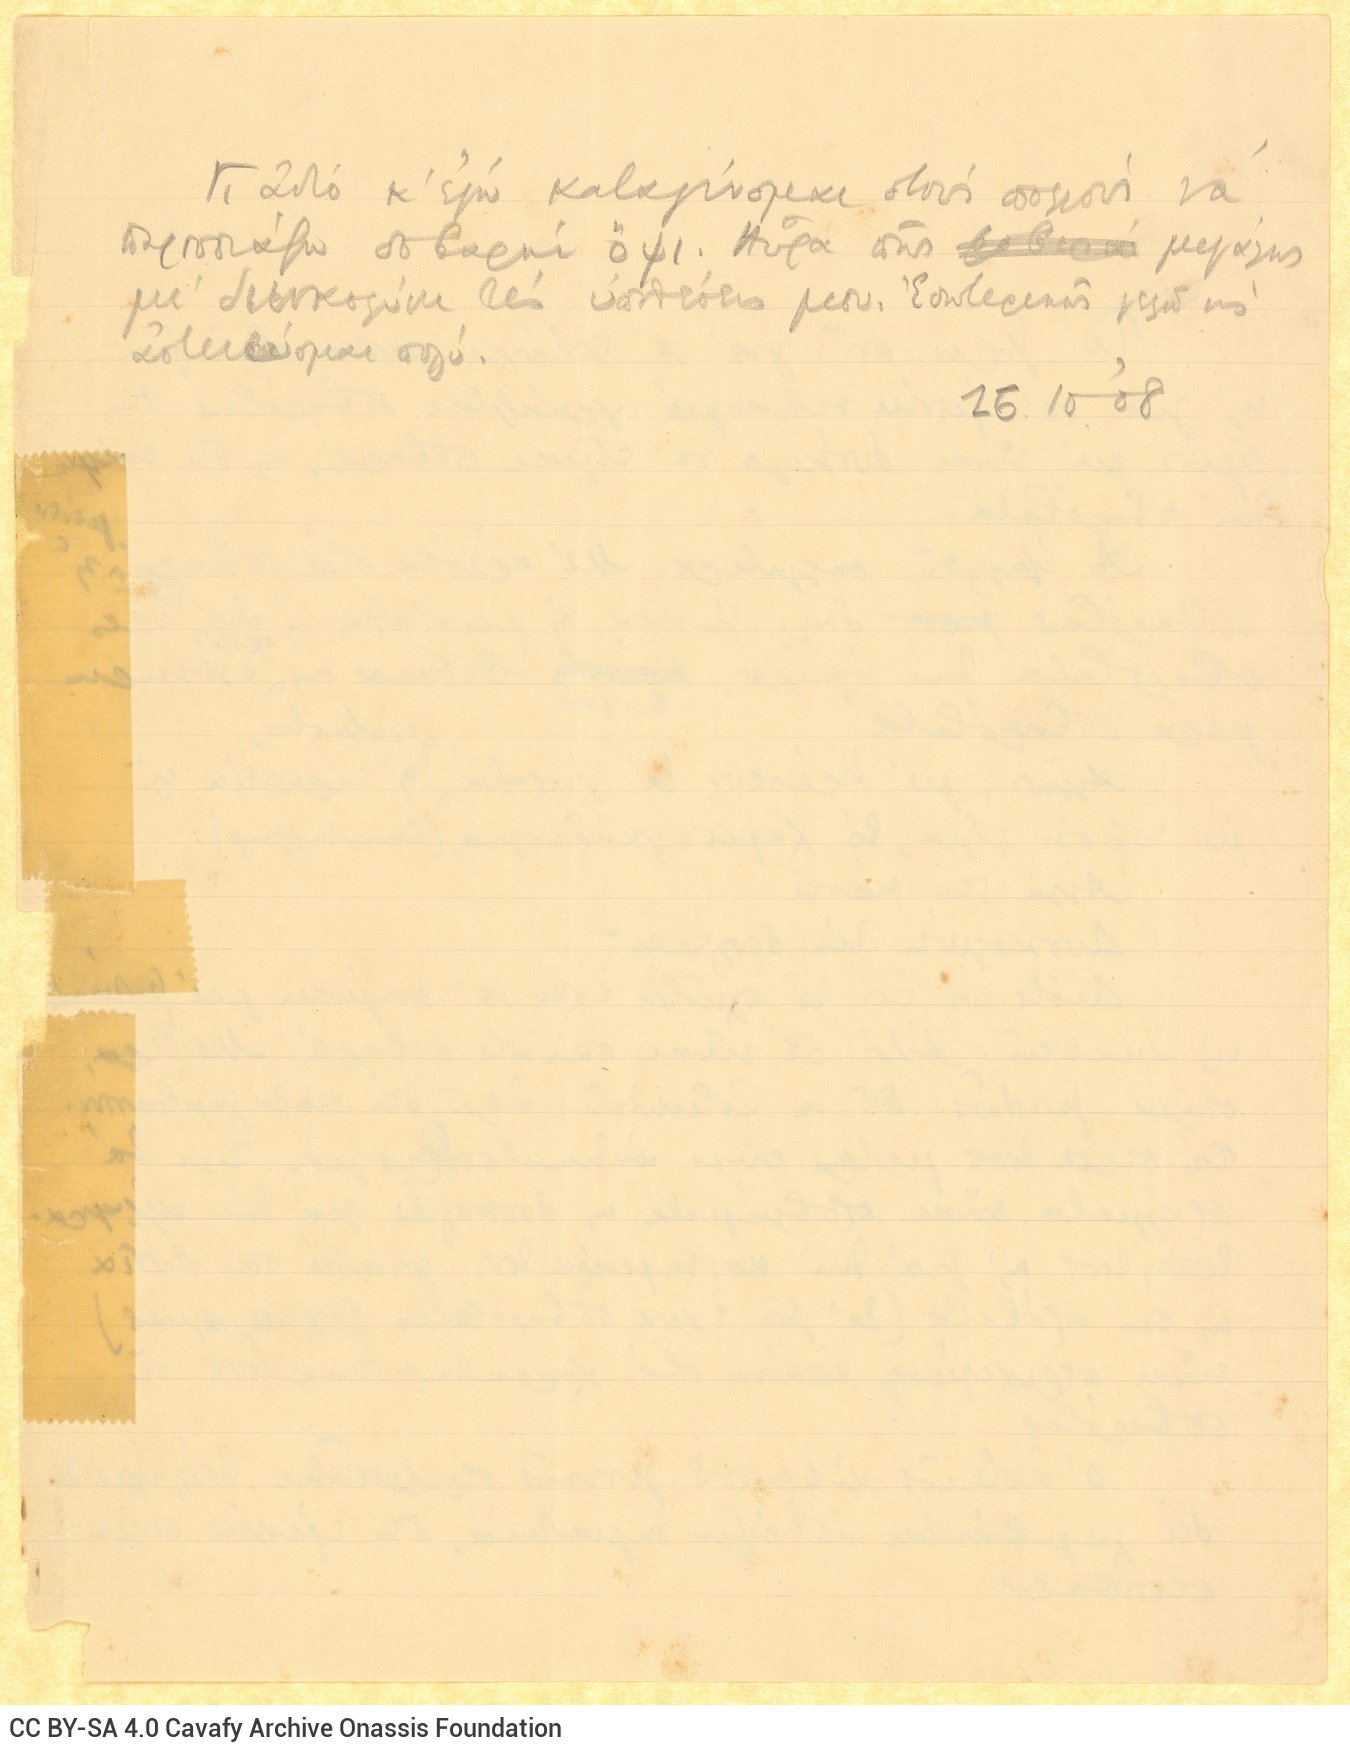 Handwritten note on both sides of a ruled sheet with the poet's thoughts on the importance of seriousness and on people wi